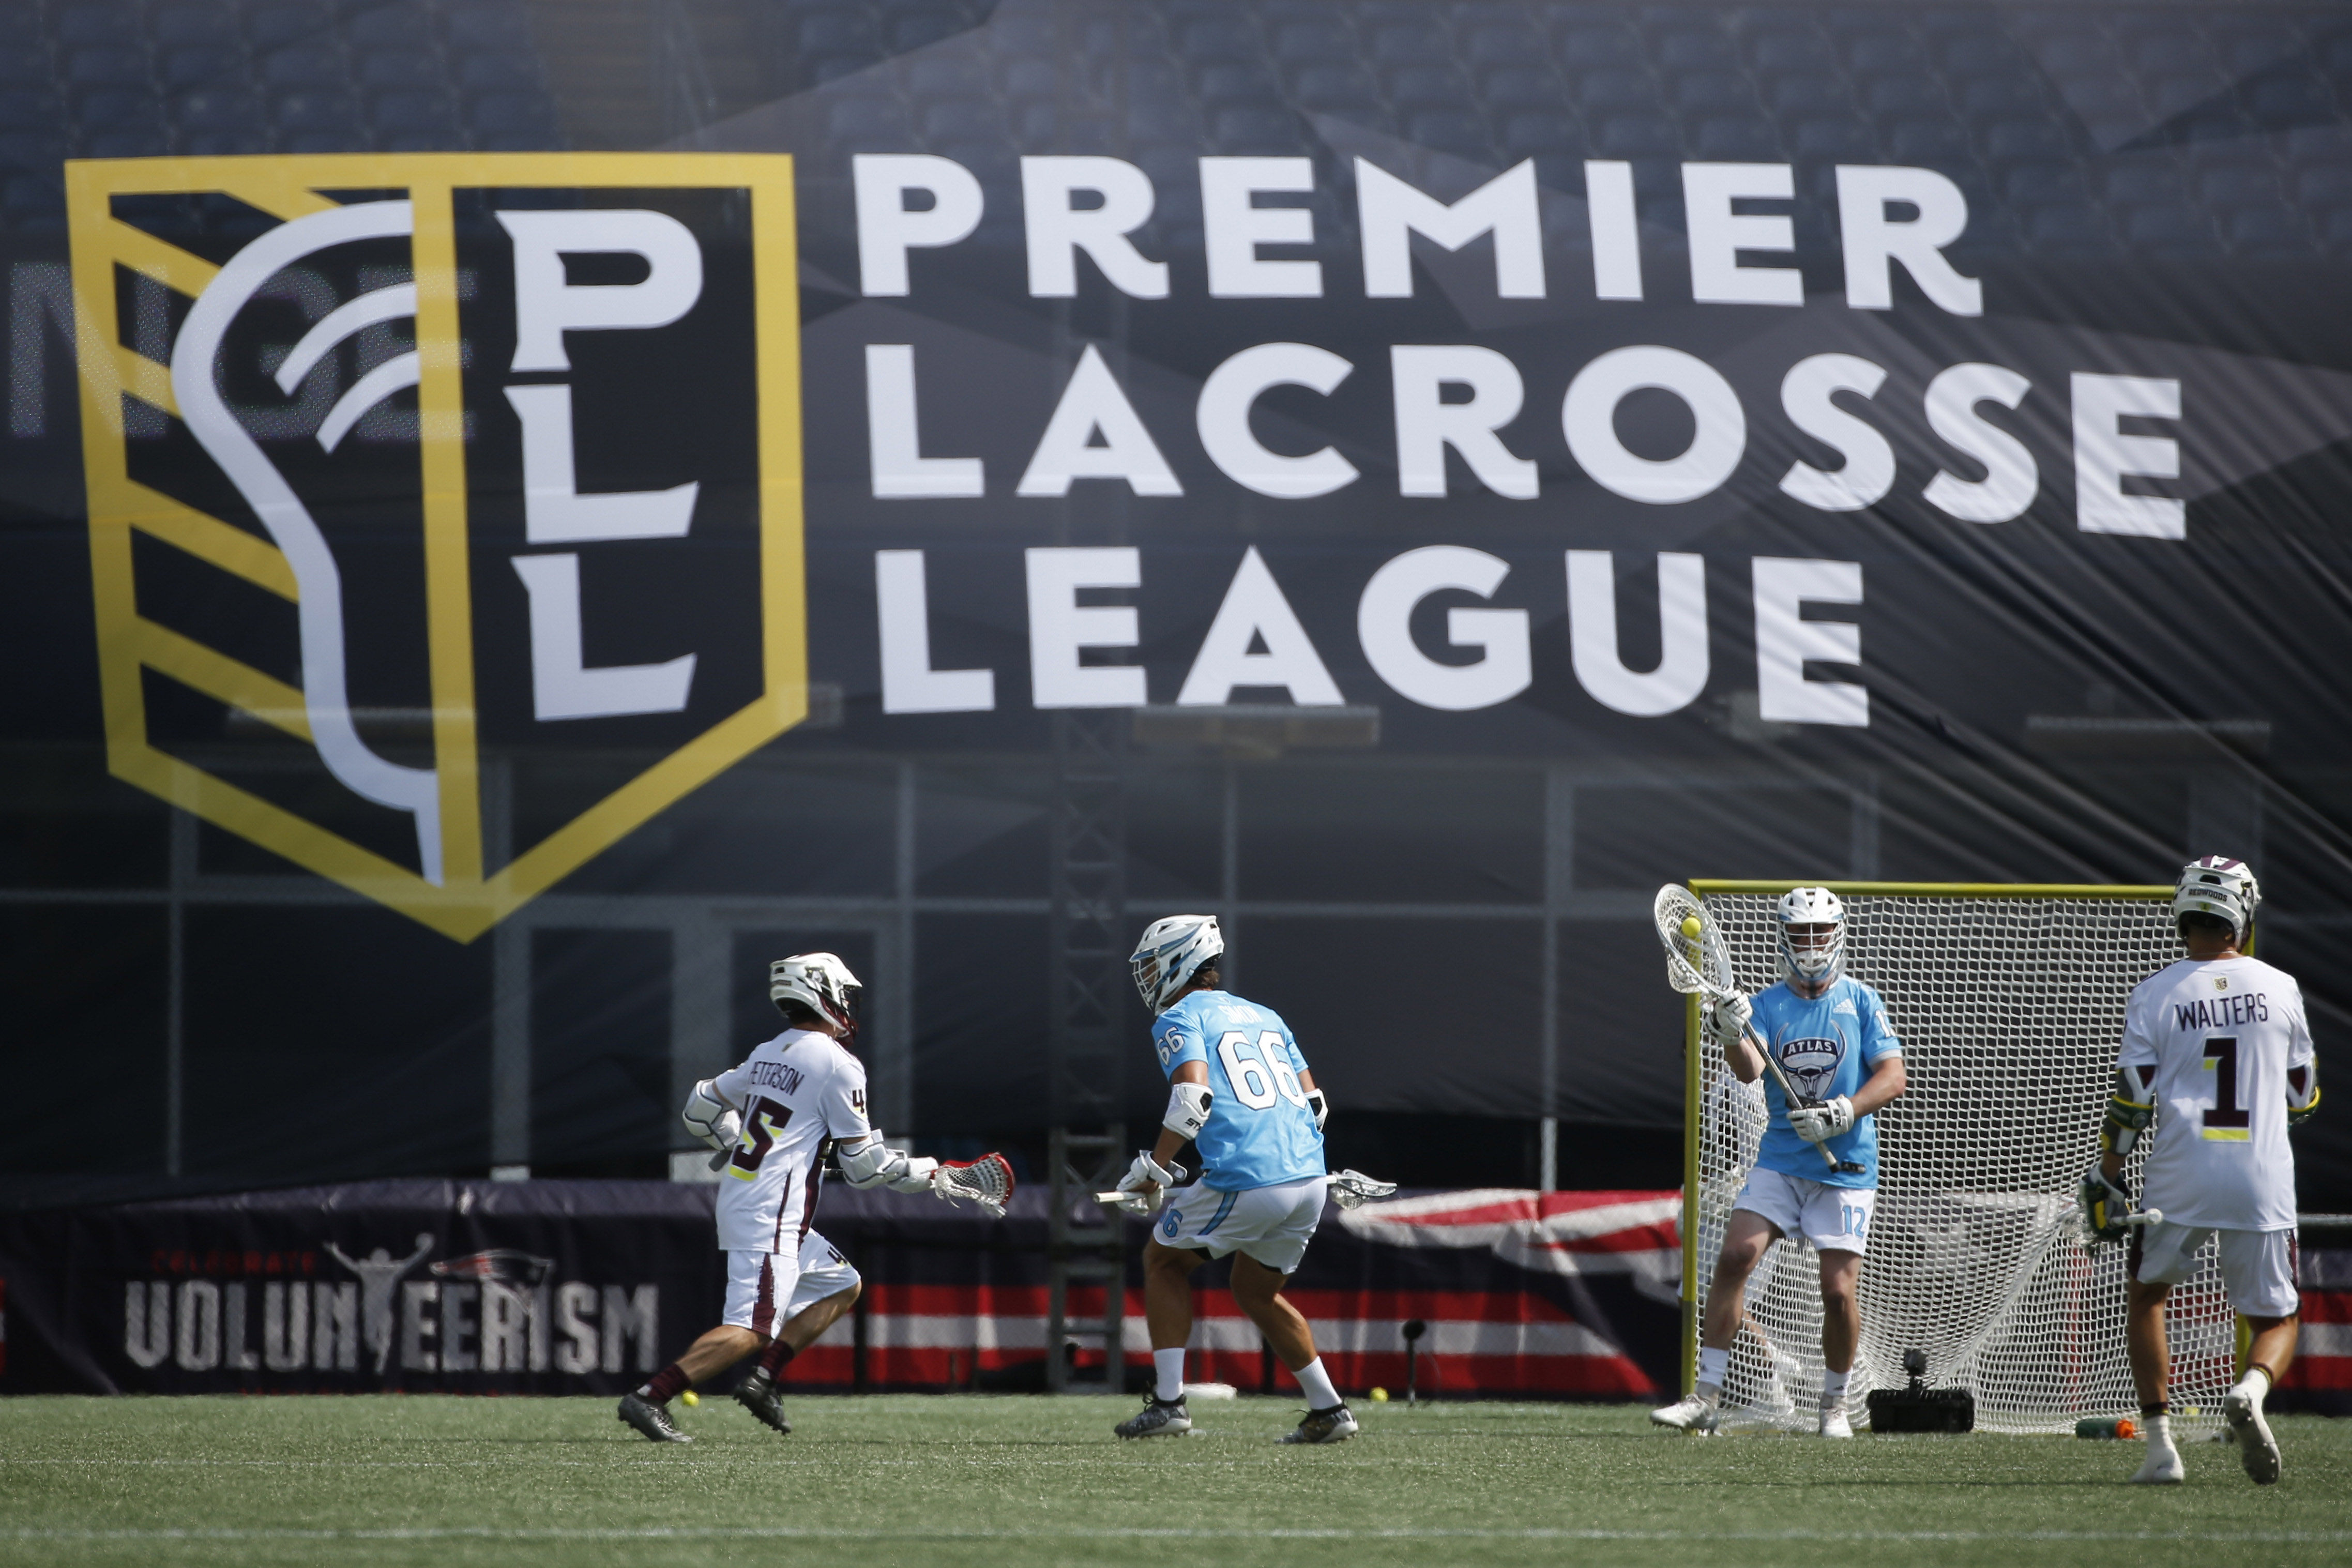 NBC Finds Success With Premier Lacrosse League In Year One